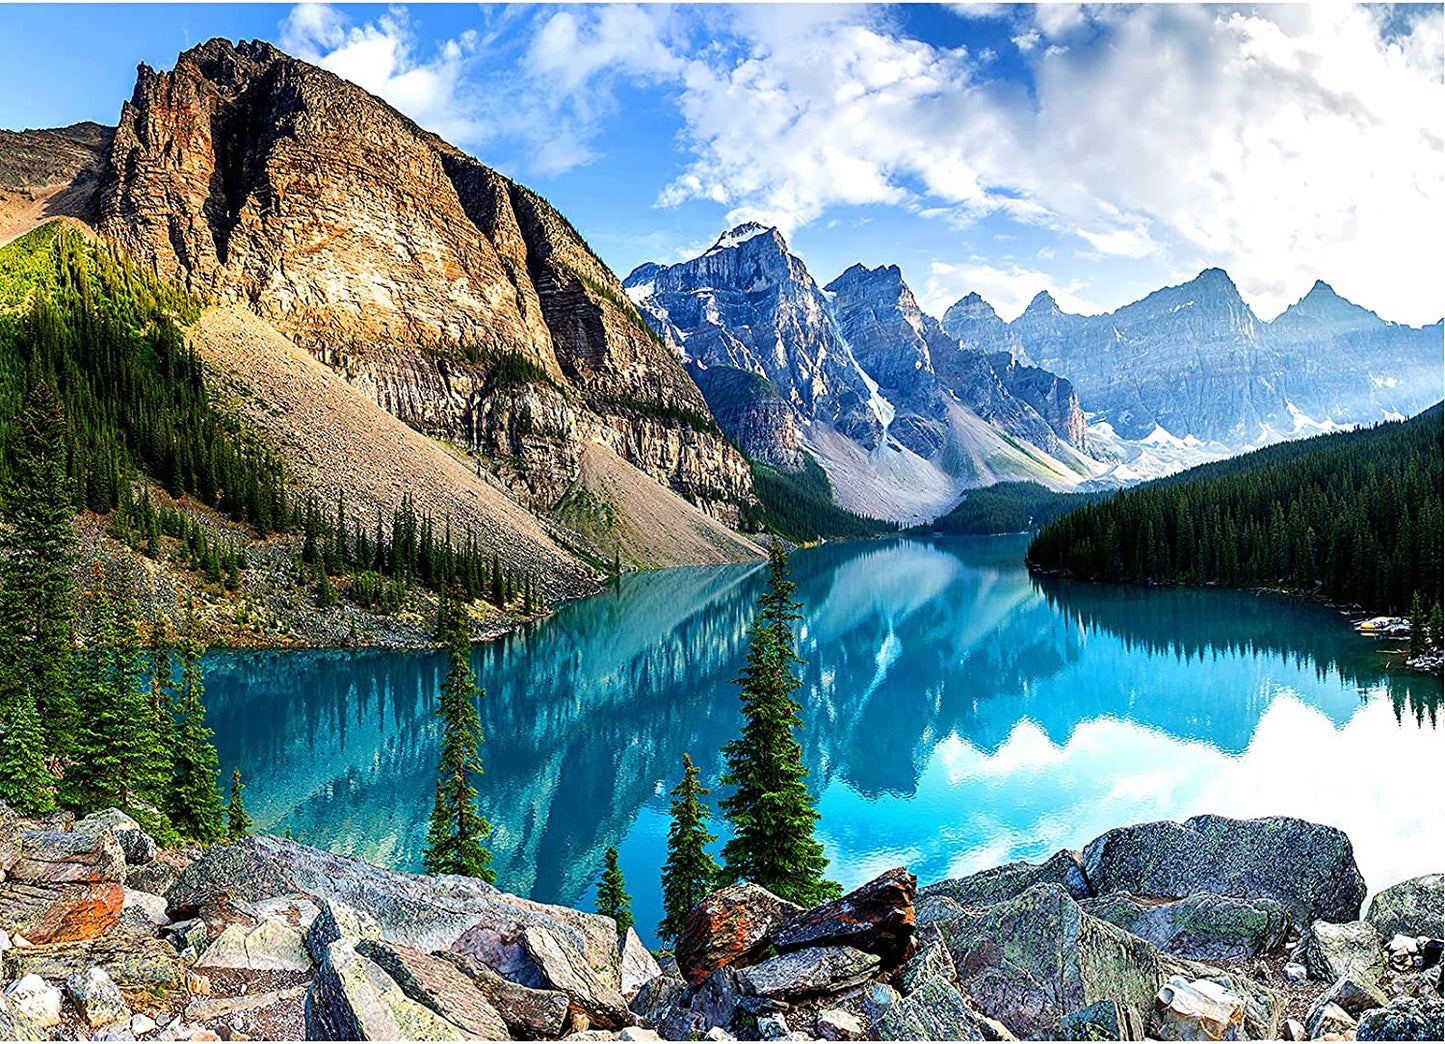 1000 Piece Puzzles for Adults, Moraine Lake Jigsaw Puzzle